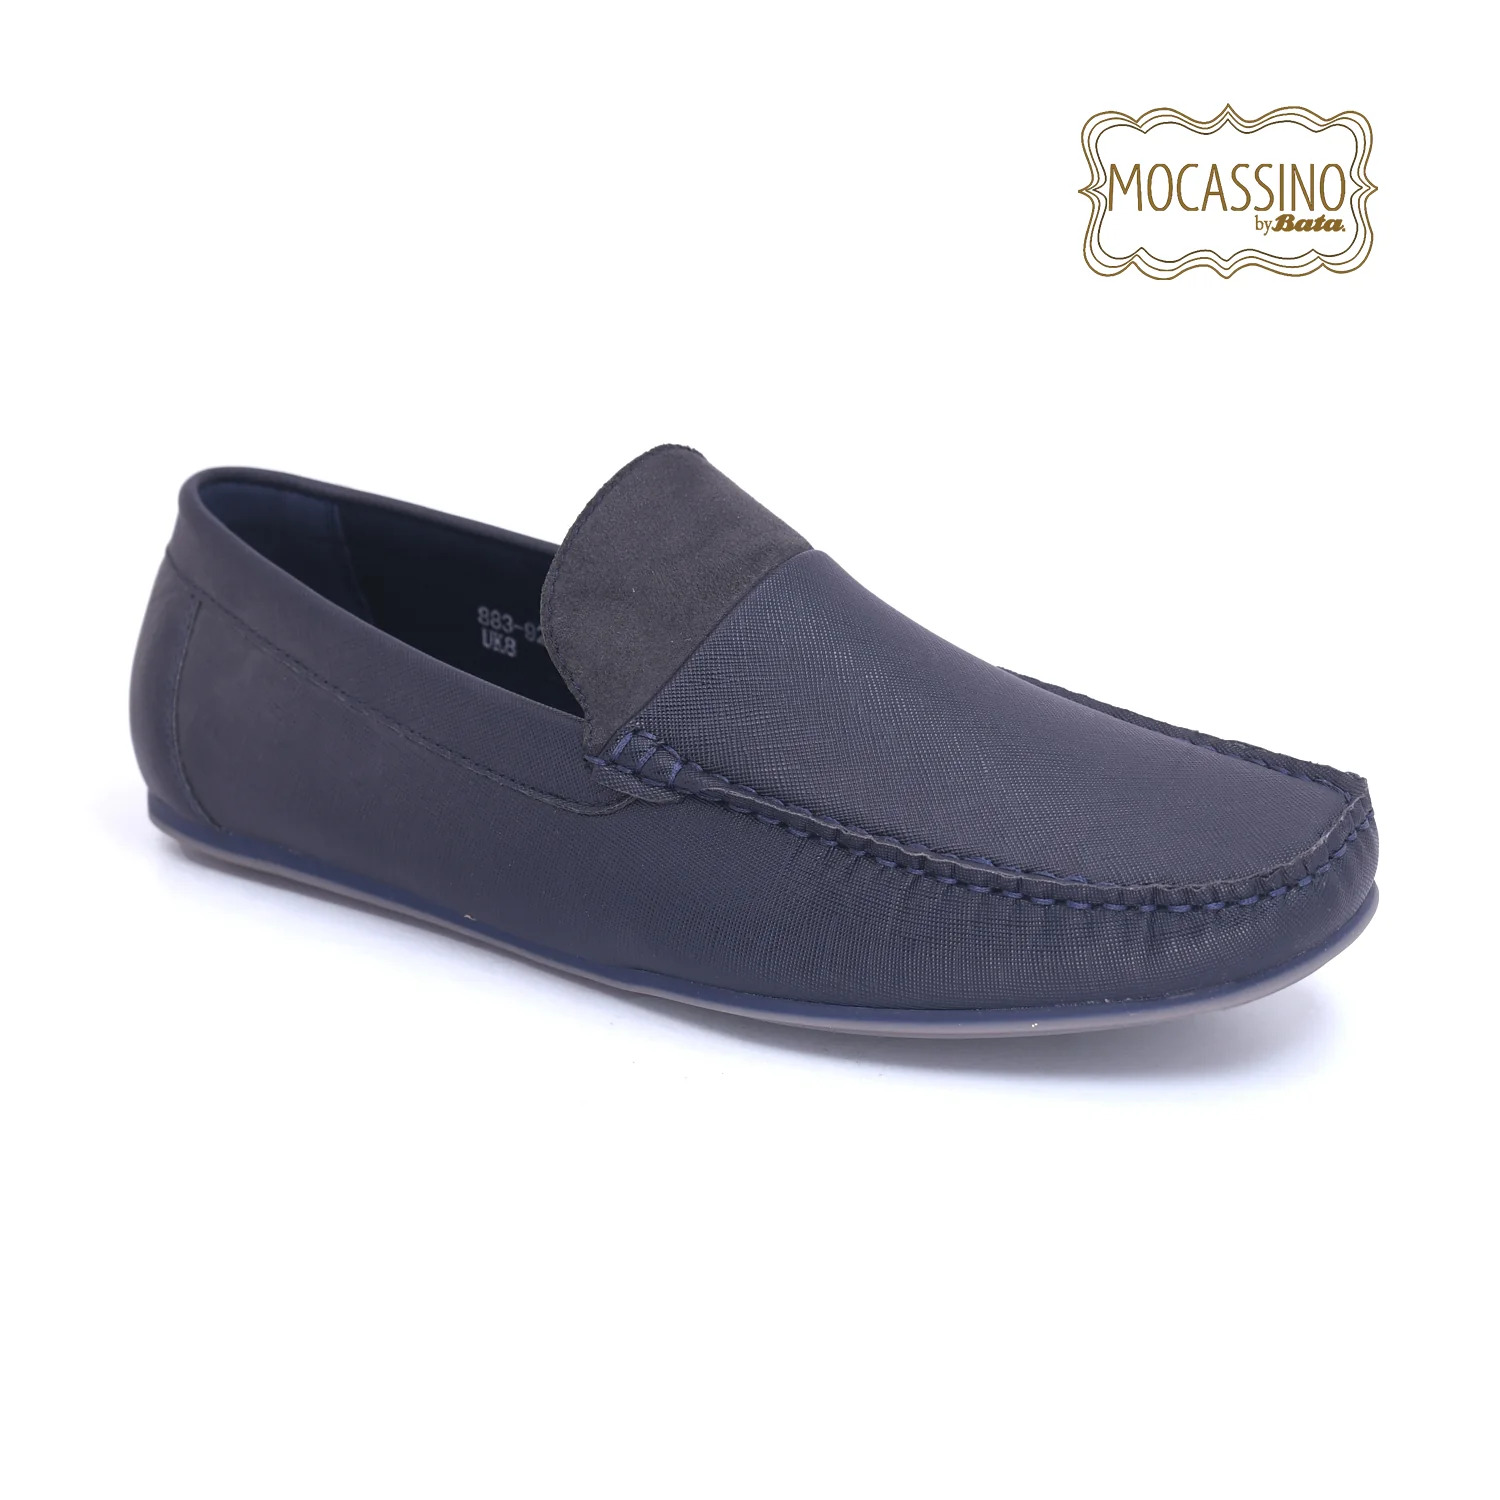 a black loafer with a white background